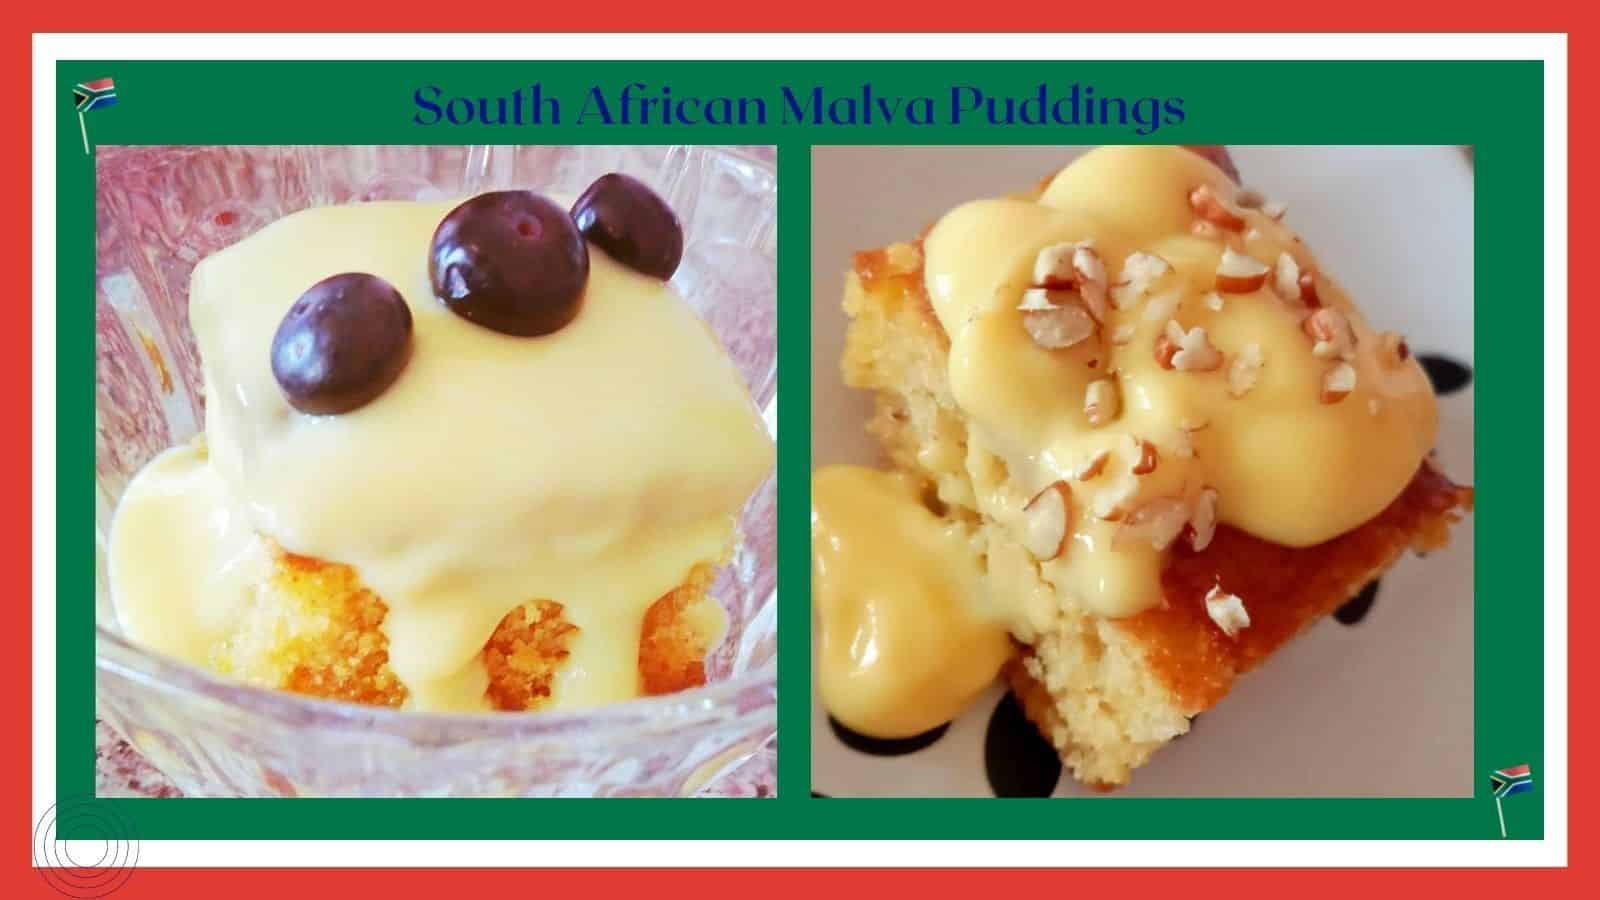 An image of a block of South African Malva Pudding with custard and nuts and one with berries